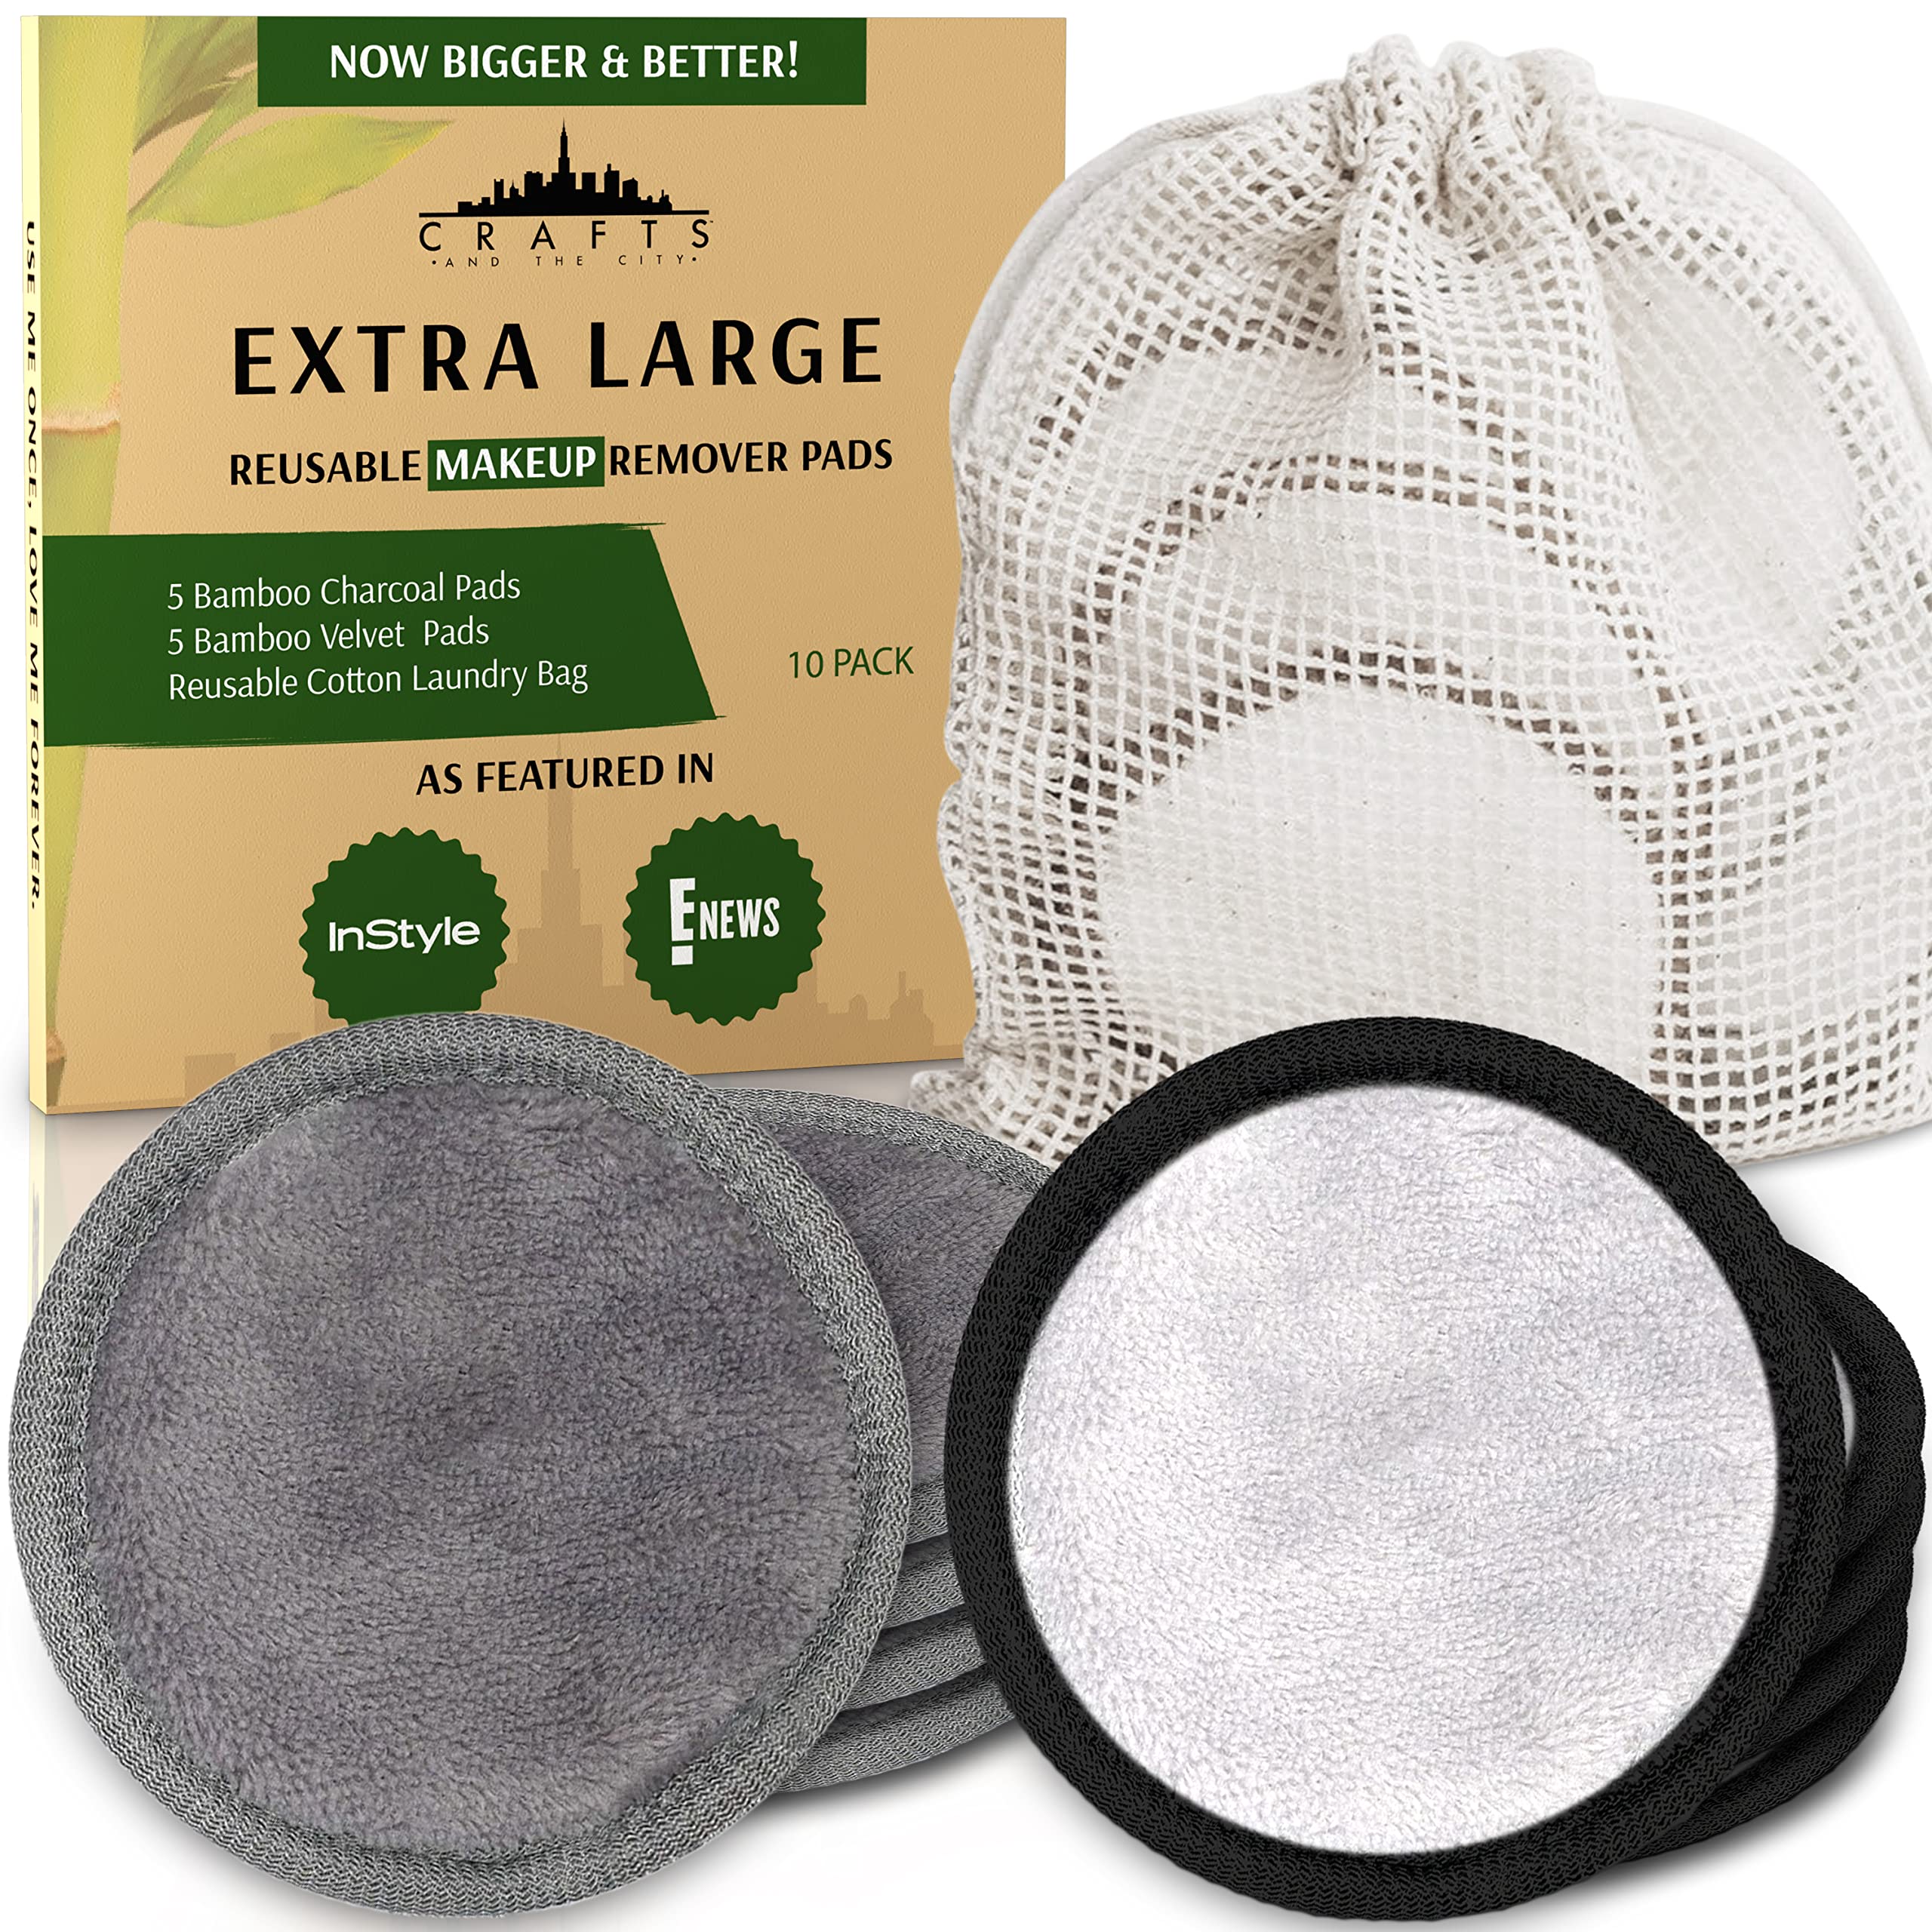 Crafts And The City XL Extra Large Reusable Cotton Pads for Face - Reusable Eye Makeup Remover Pads- Soft Bamboo Make Up Cotton Rounds with Holder-Facial Wipes -Makeup Removing Washable Pad Set of 10